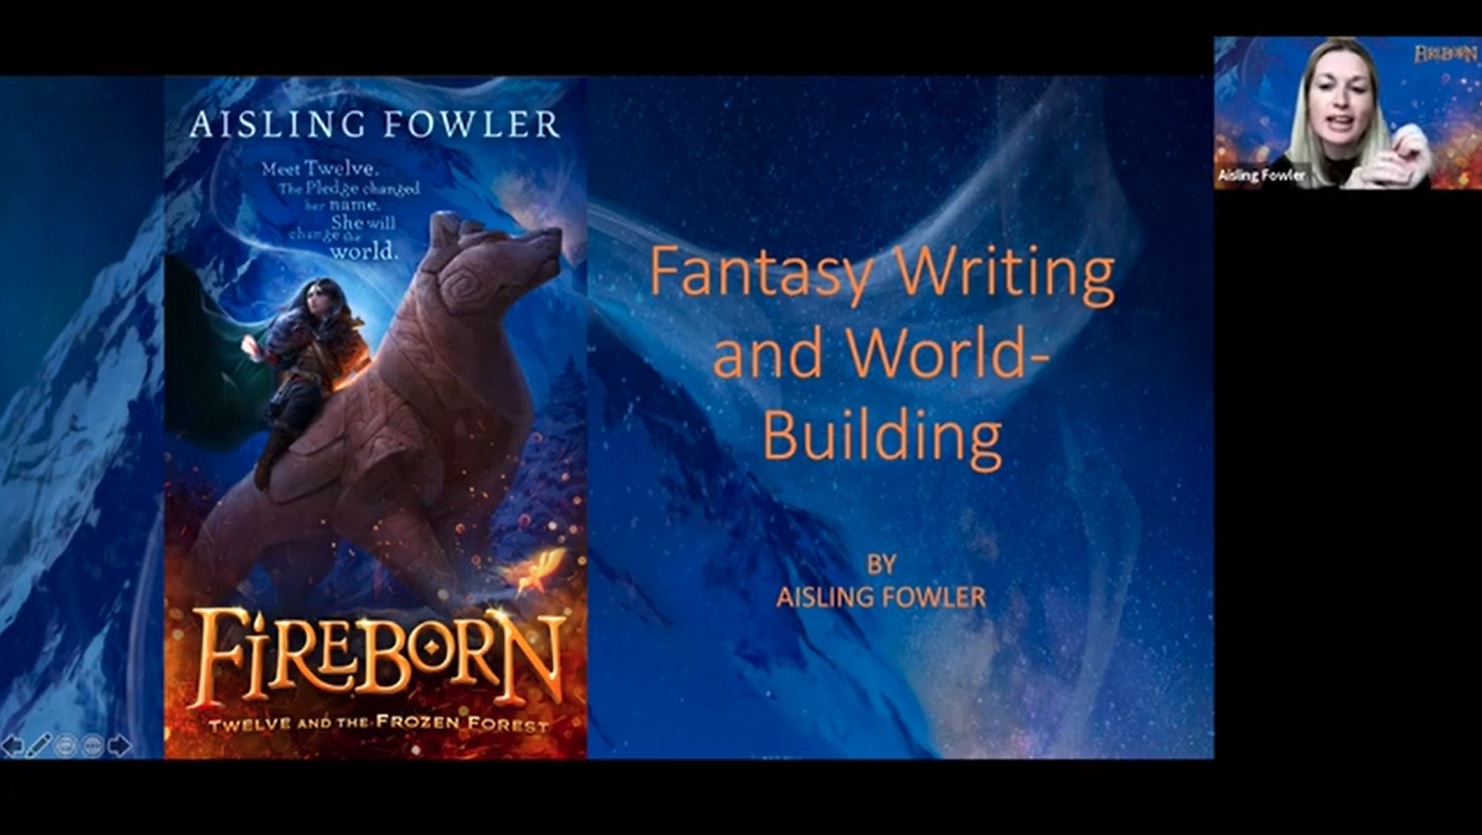 Author Aisling Fowler on Fantasy Writing 